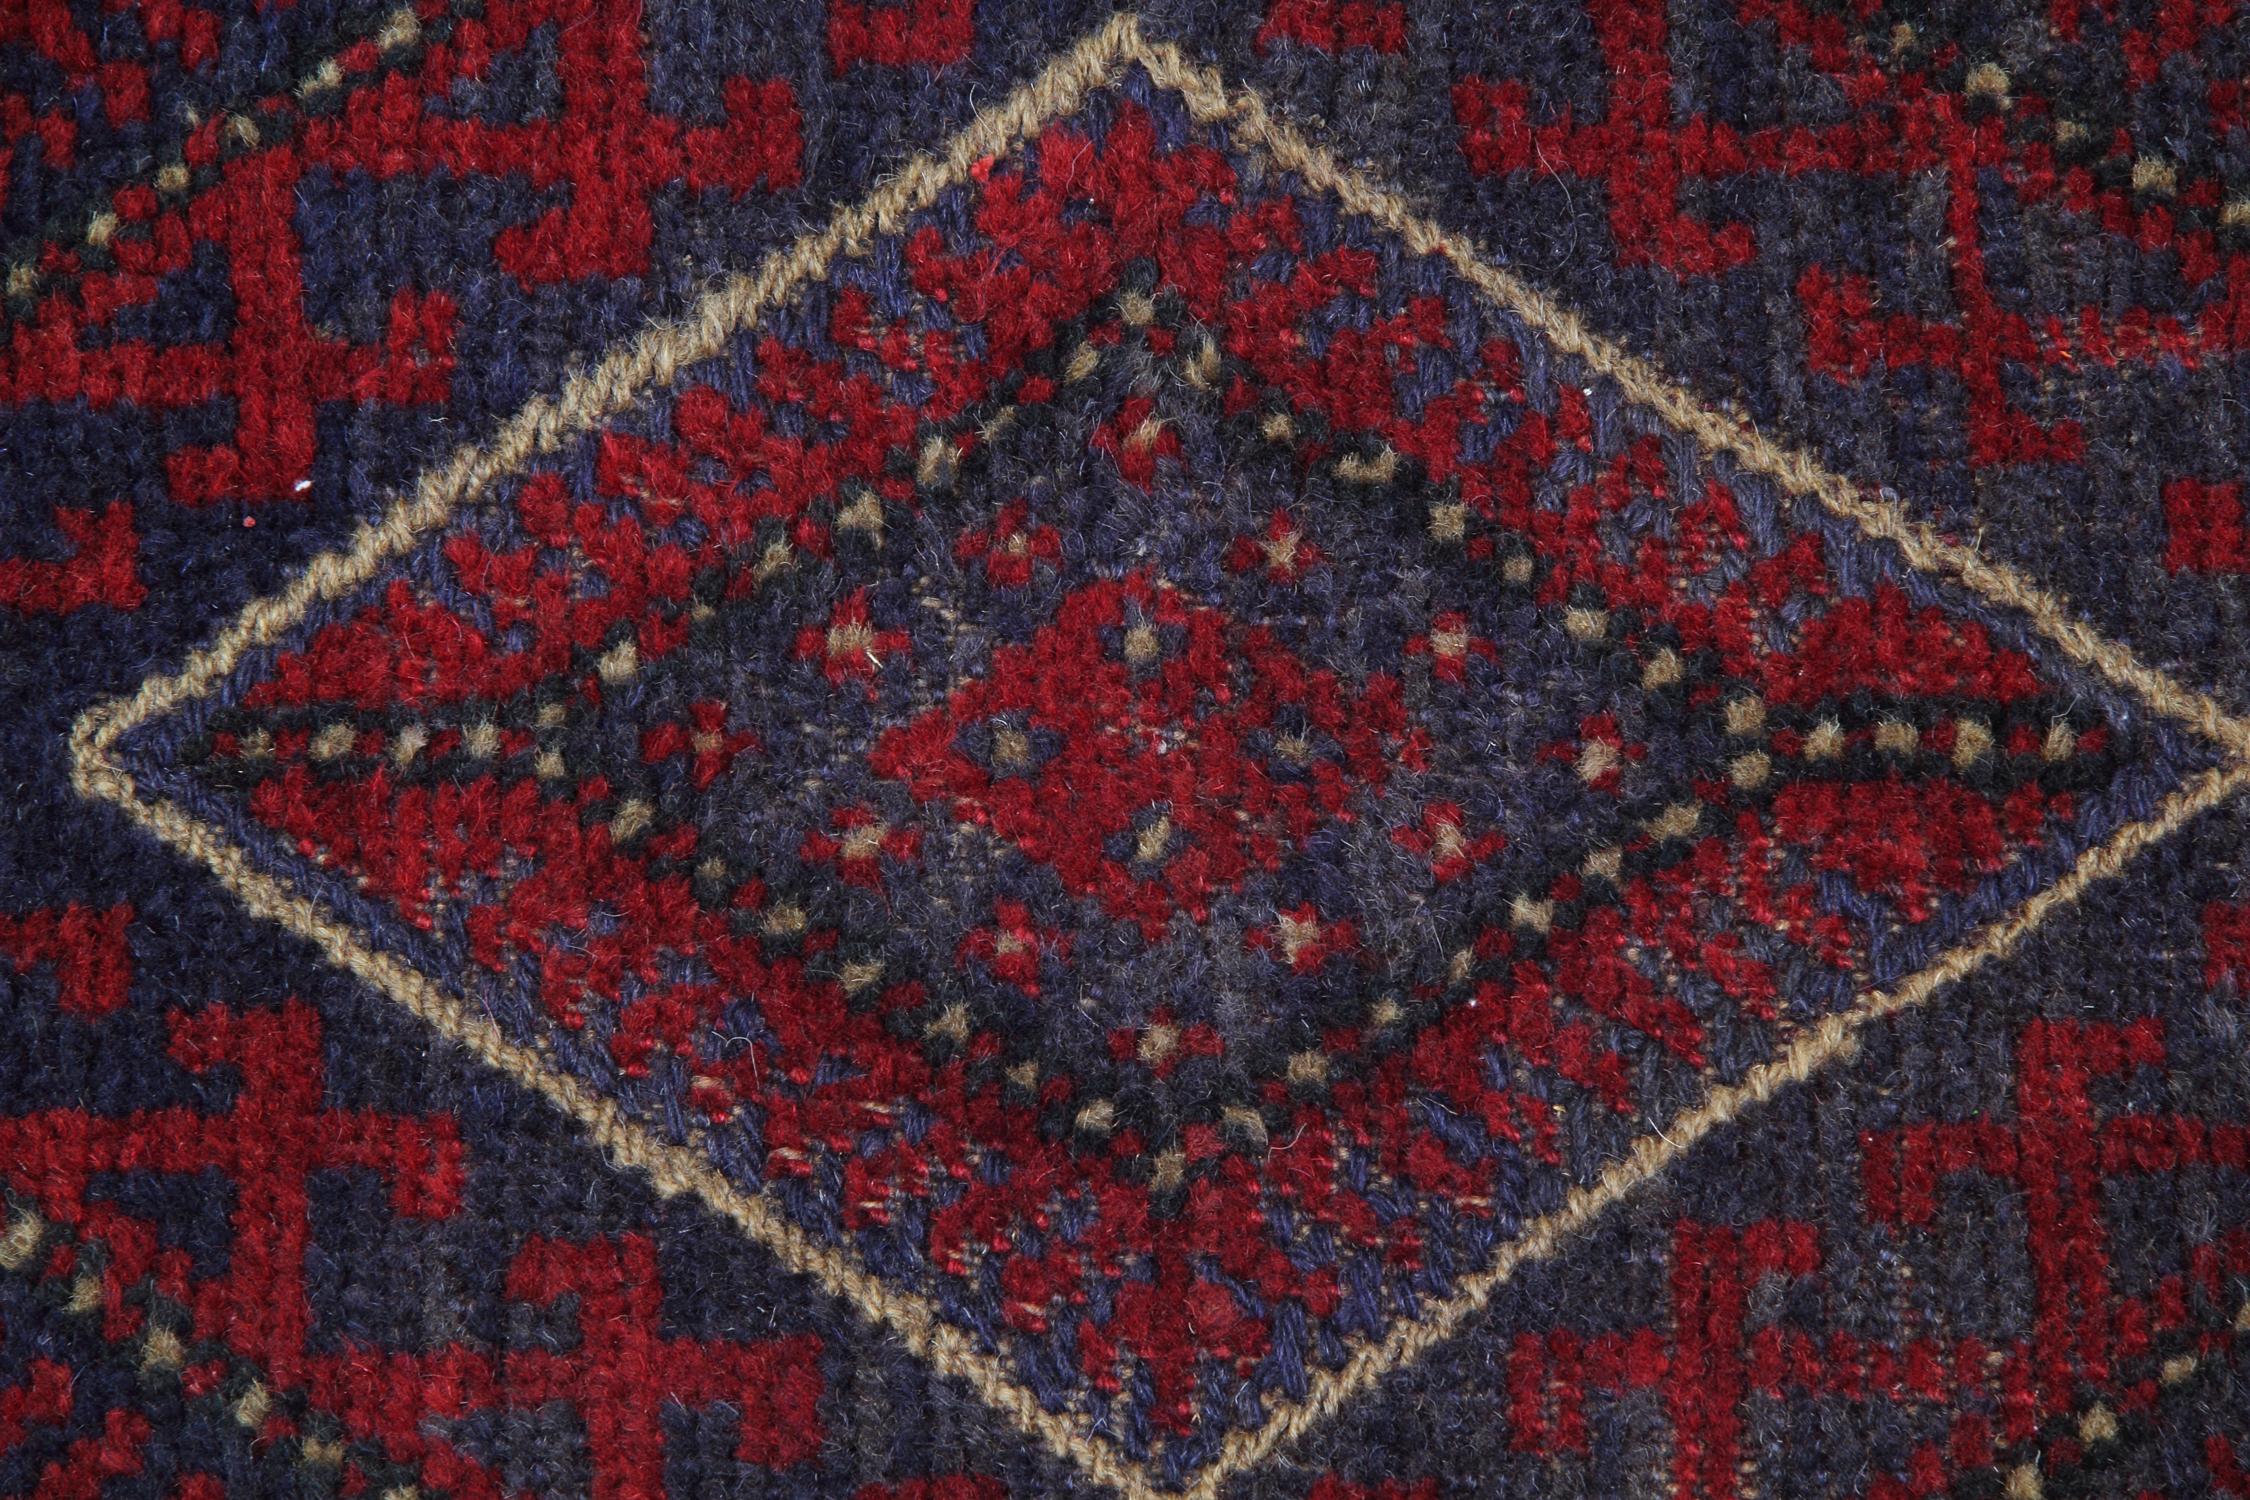 This impressive antique red rug is made from our master weavers in Caucasia. These particular carpet runners are made with all-natural vegetable dyes. The patterned rugs display an all-over geometrical rug pattern. This woven rug also has an